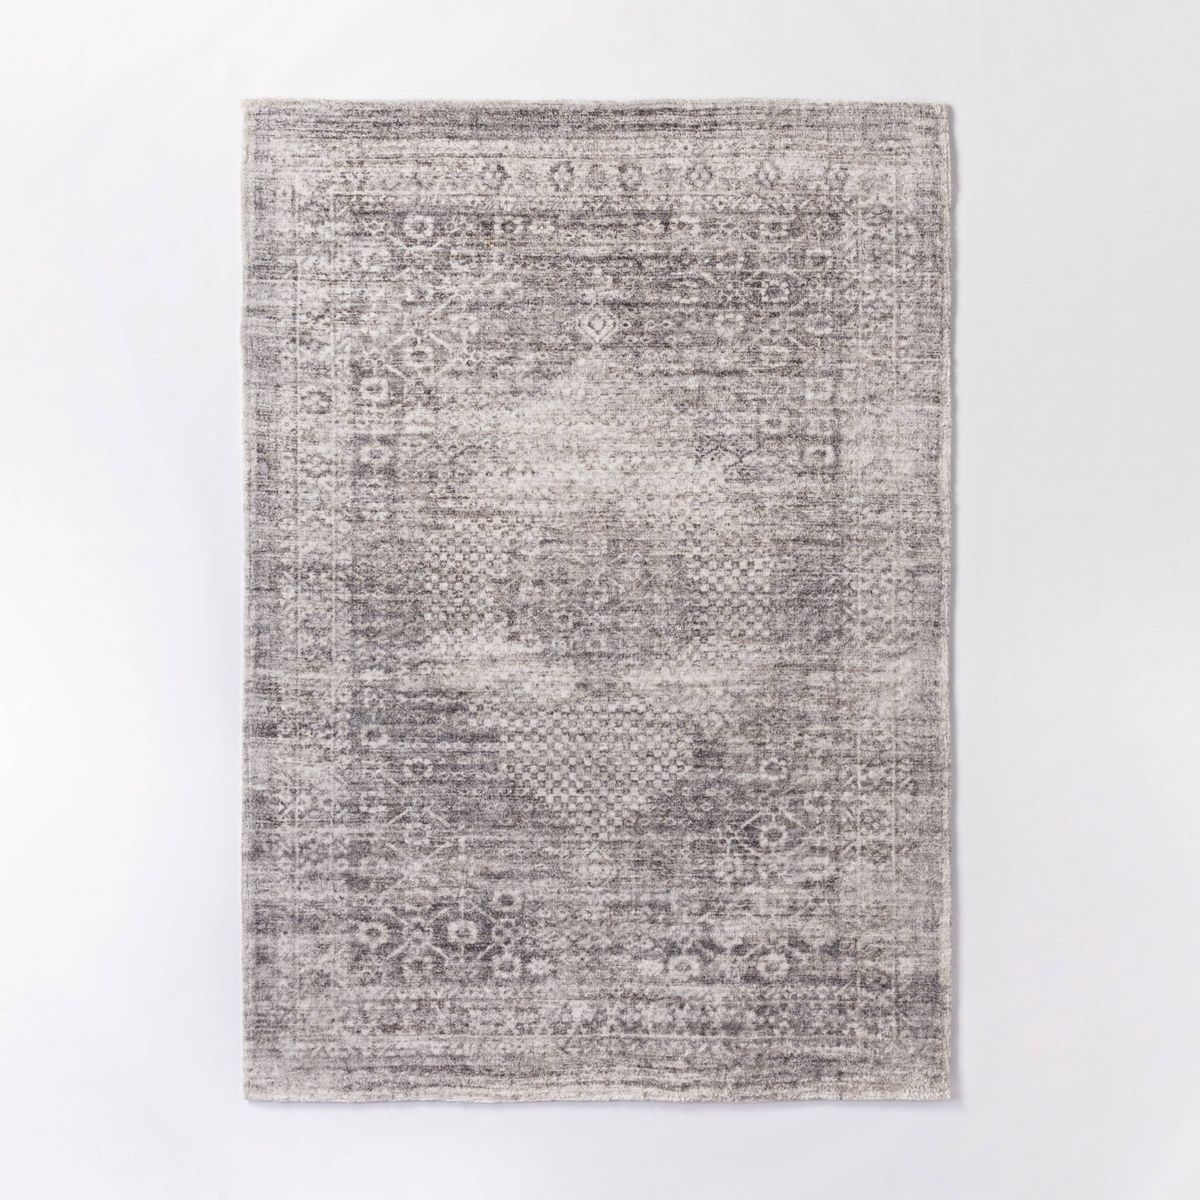 Millcreek Distressed Vintage Persian Rug Charcoal - Threshold™ designed with Studio Mcgee | Target